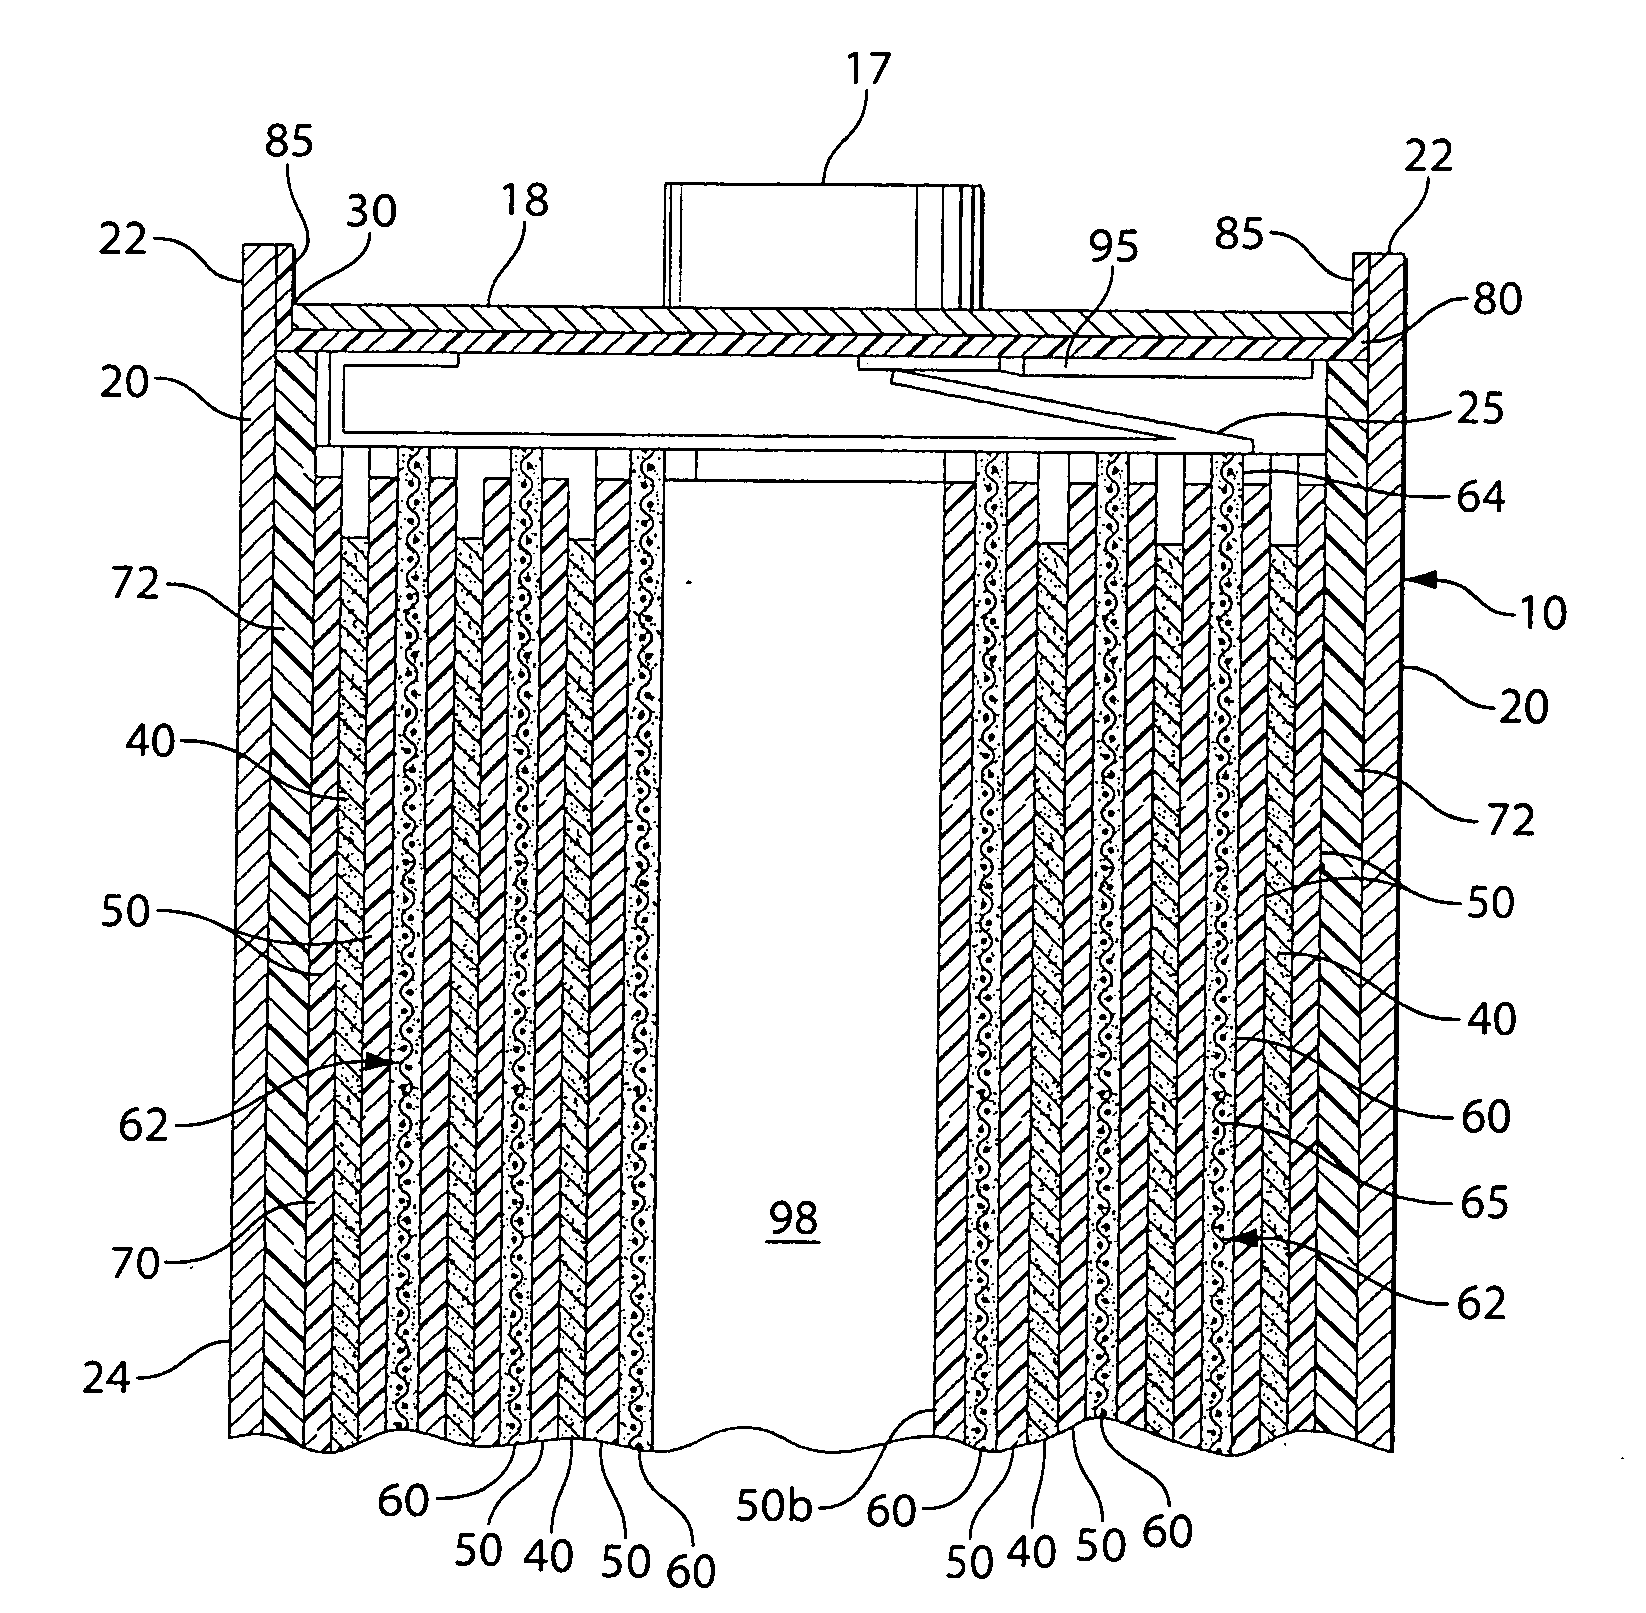 Lithium cell with cathode containing iron disulfide